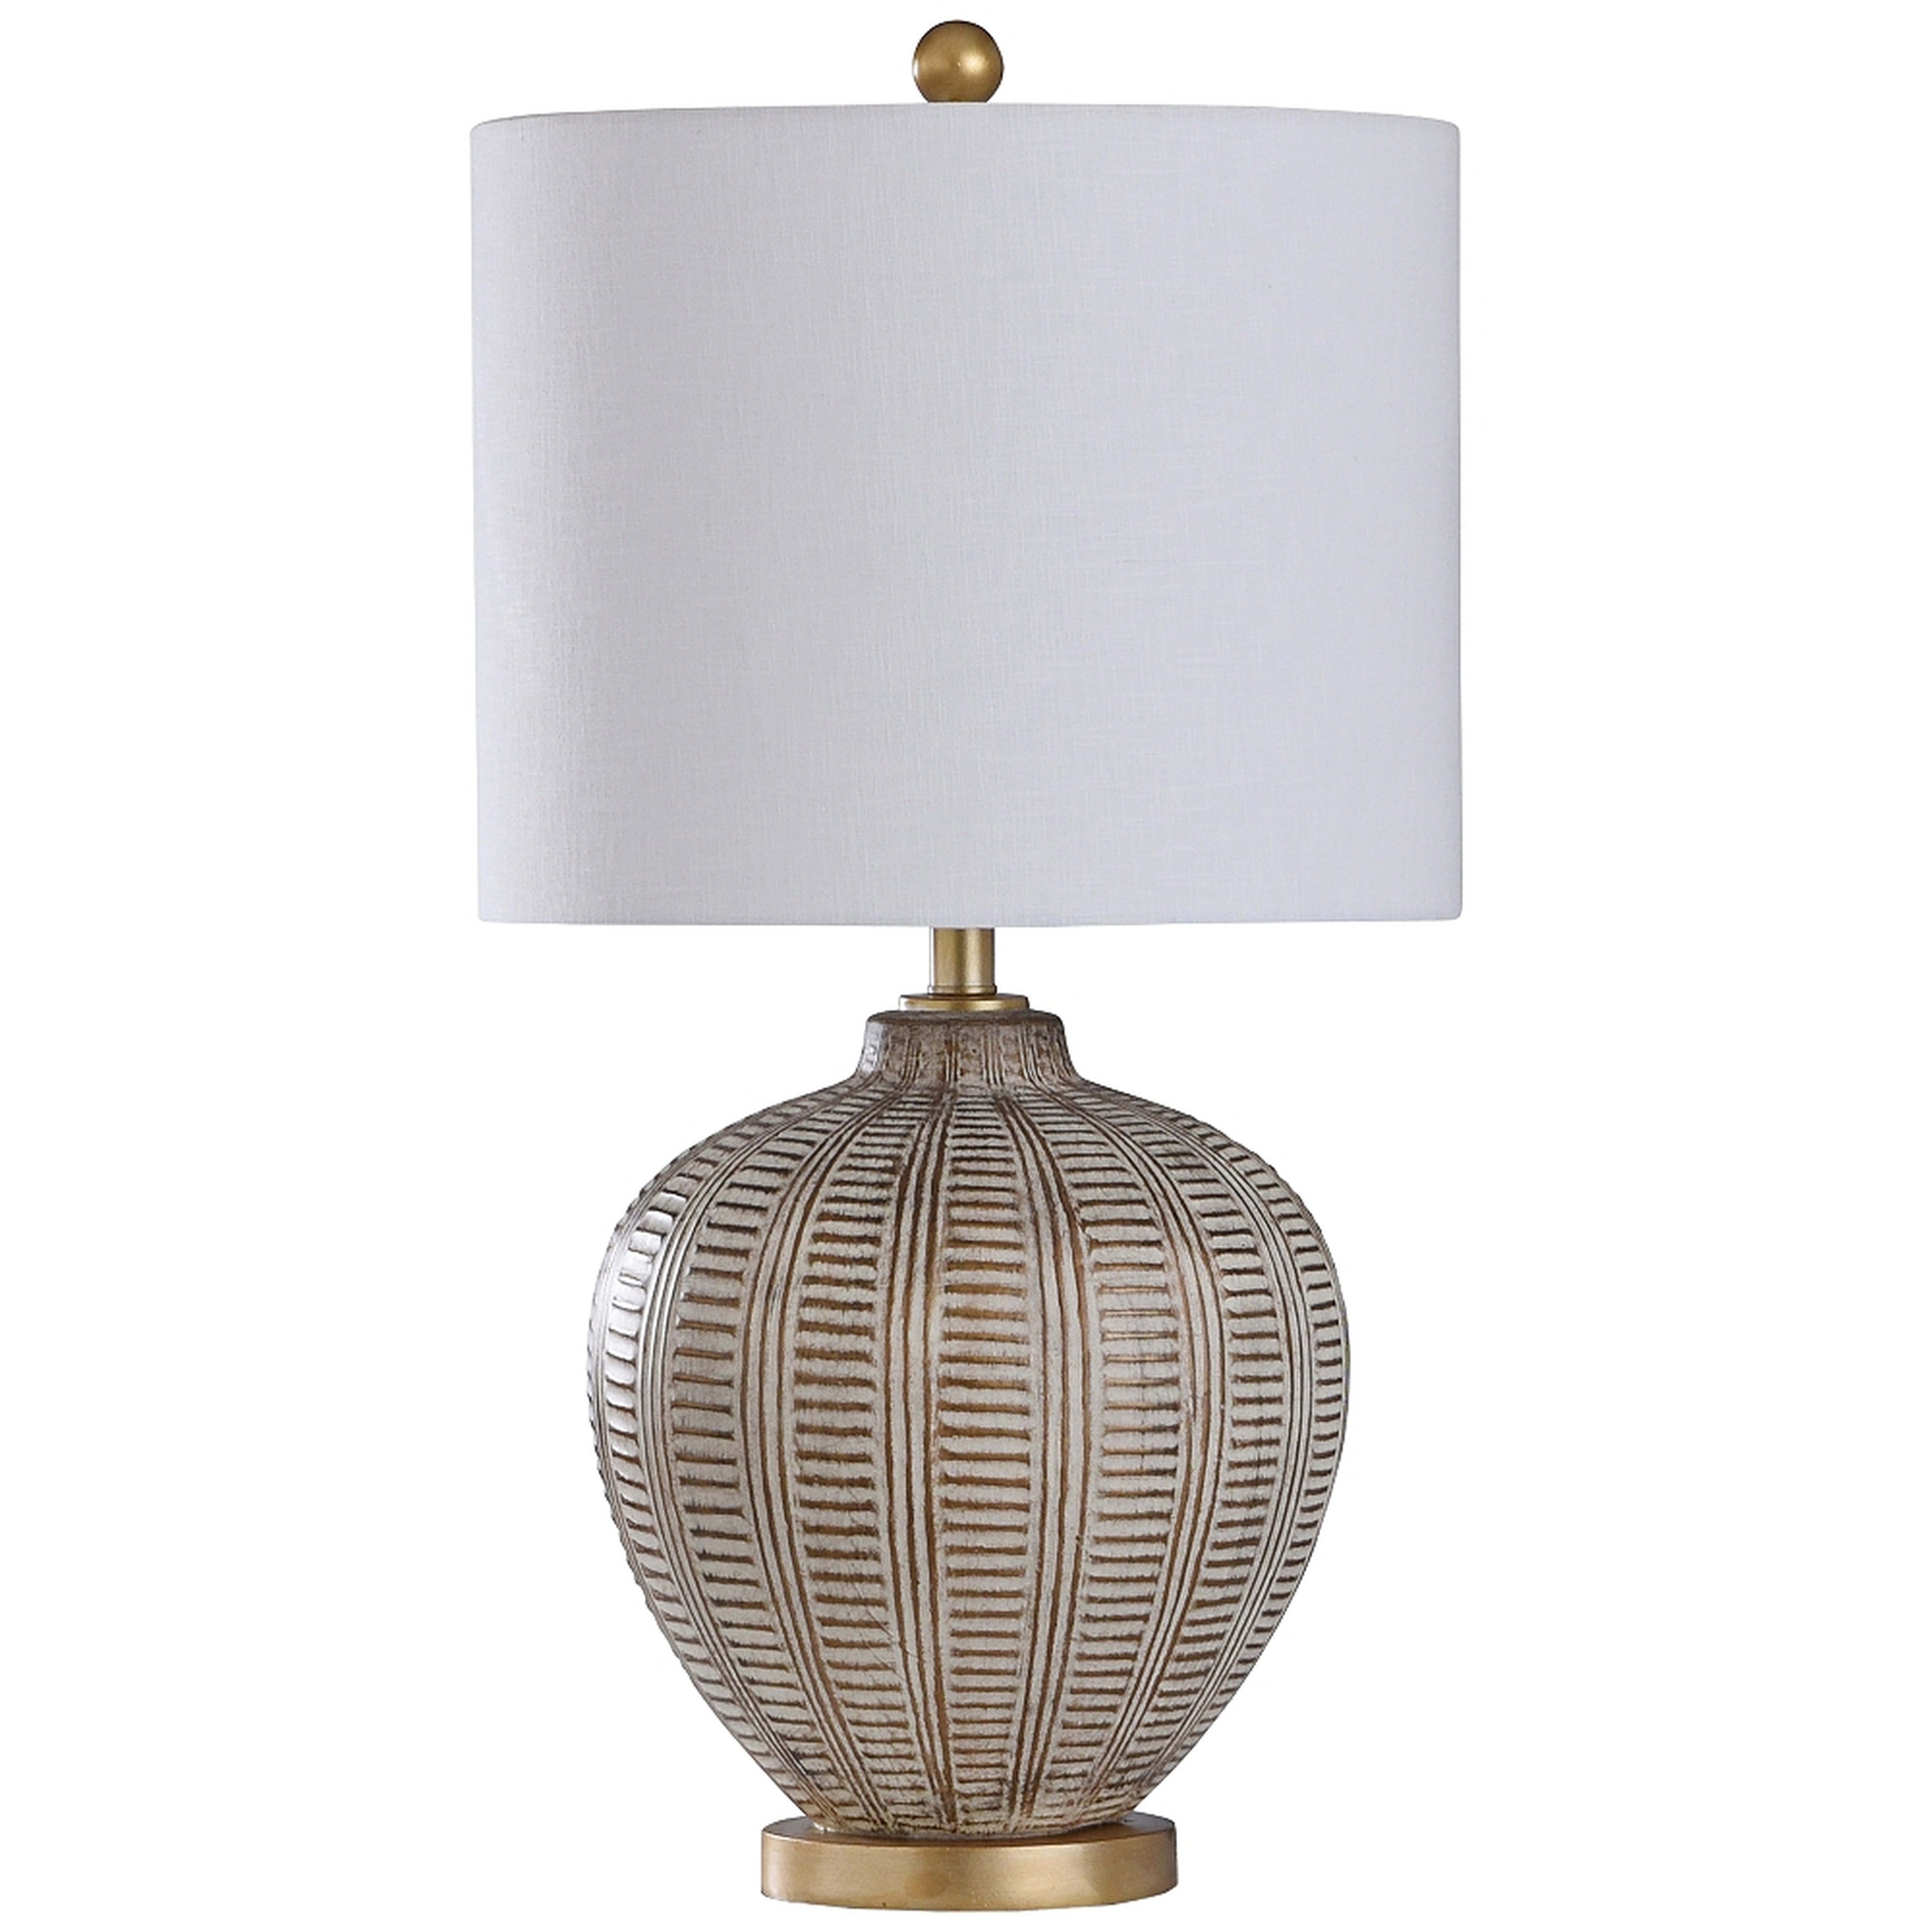 Baffo Gold and Cream Vase Table Lamp - Style # 93T58 - Lamps Plus